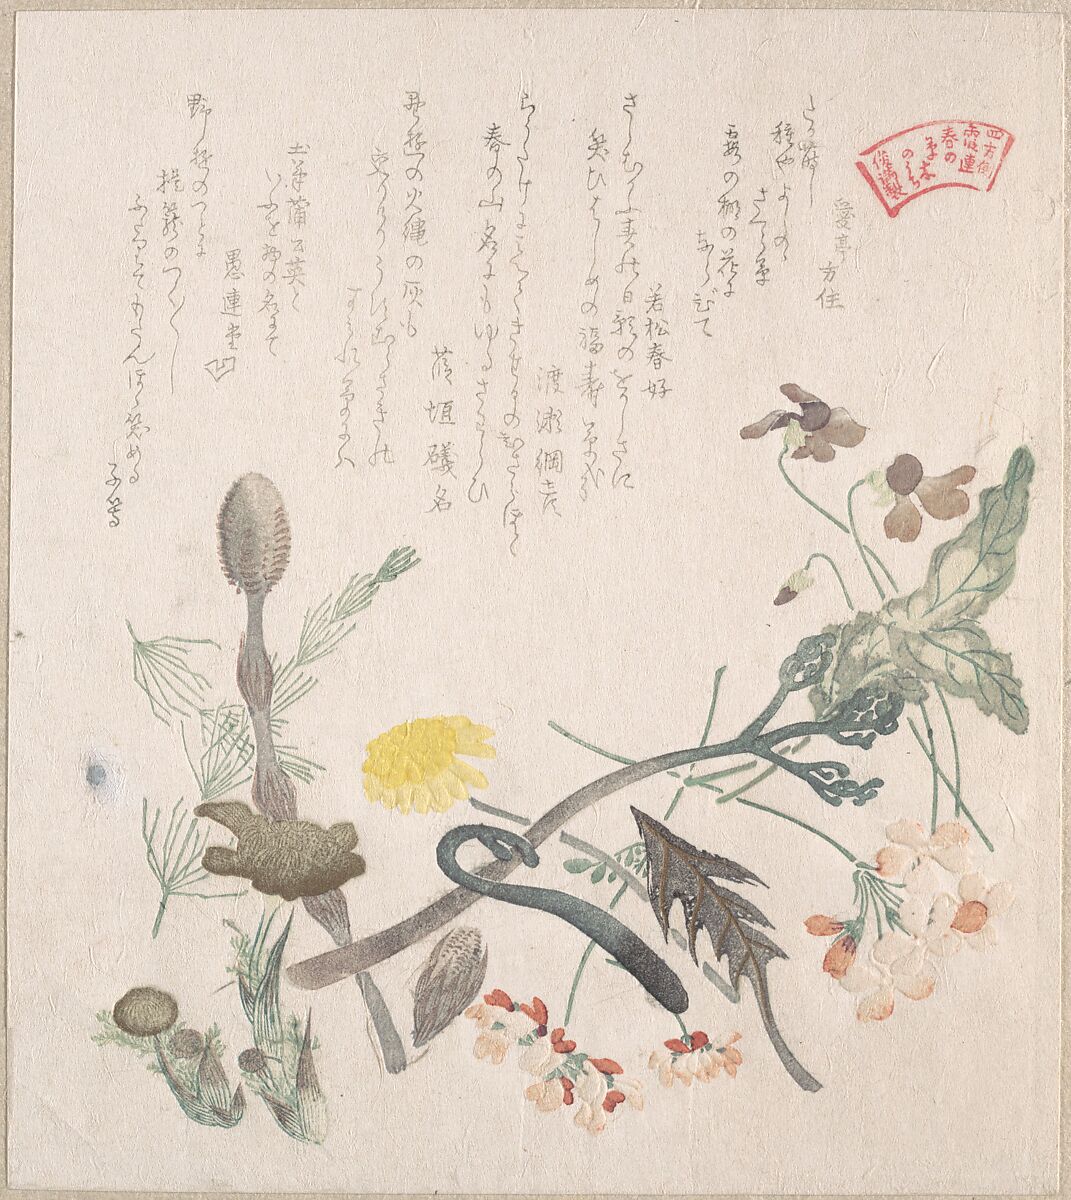 Violets, Primroses and Other Spring Flowers, Kubo Shunman (Japanese, 1757–1820), Part of an album of woodblock prints (surimono); ink and color on paper, Japan 